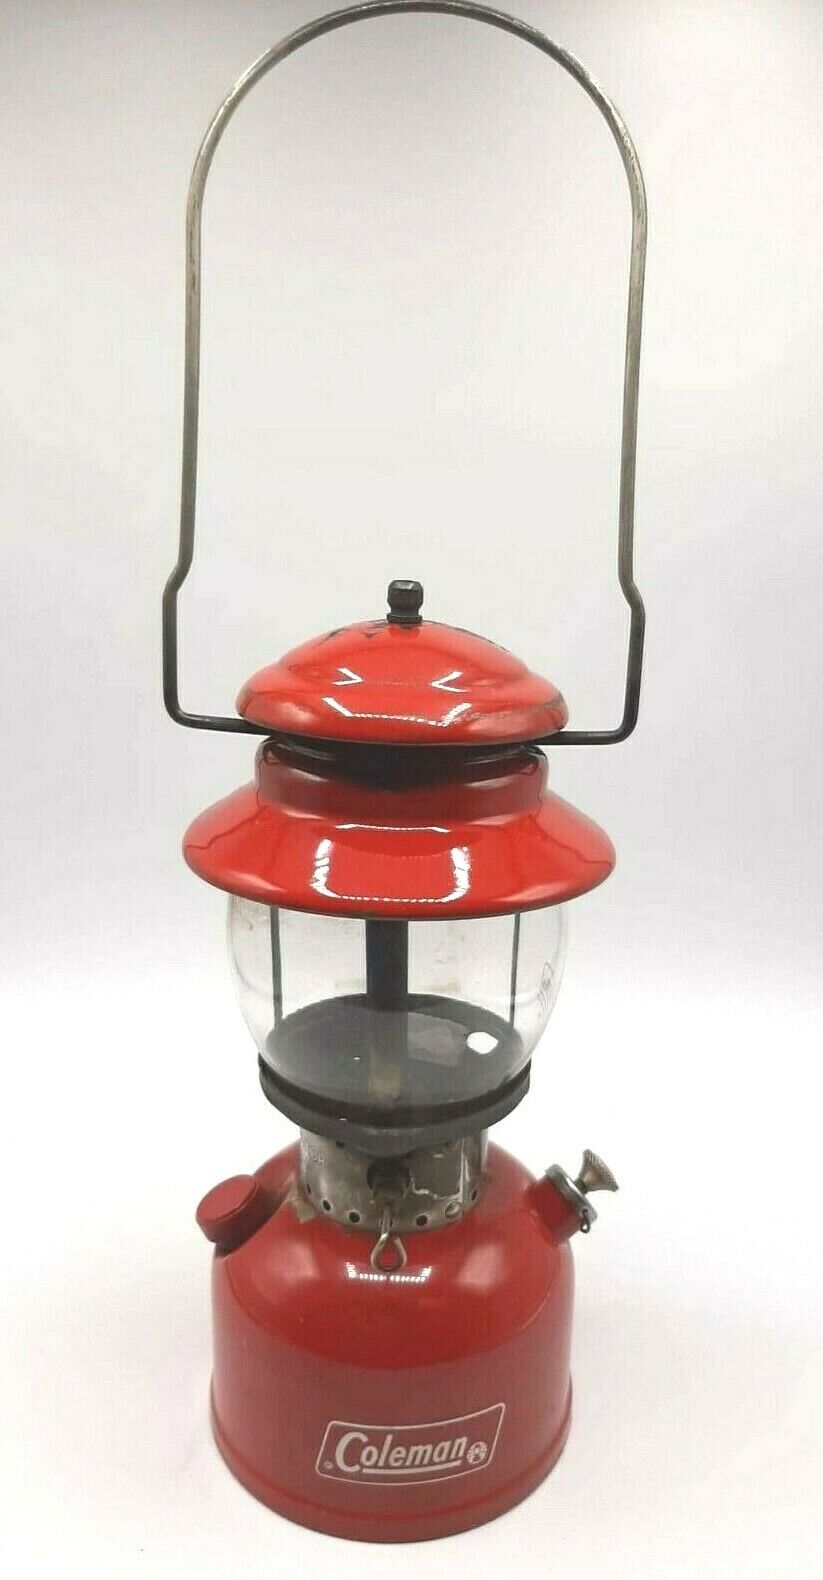 Vintage Coleman Model 200-A Sport-Lite Lantern in Coleman Box with Instructions